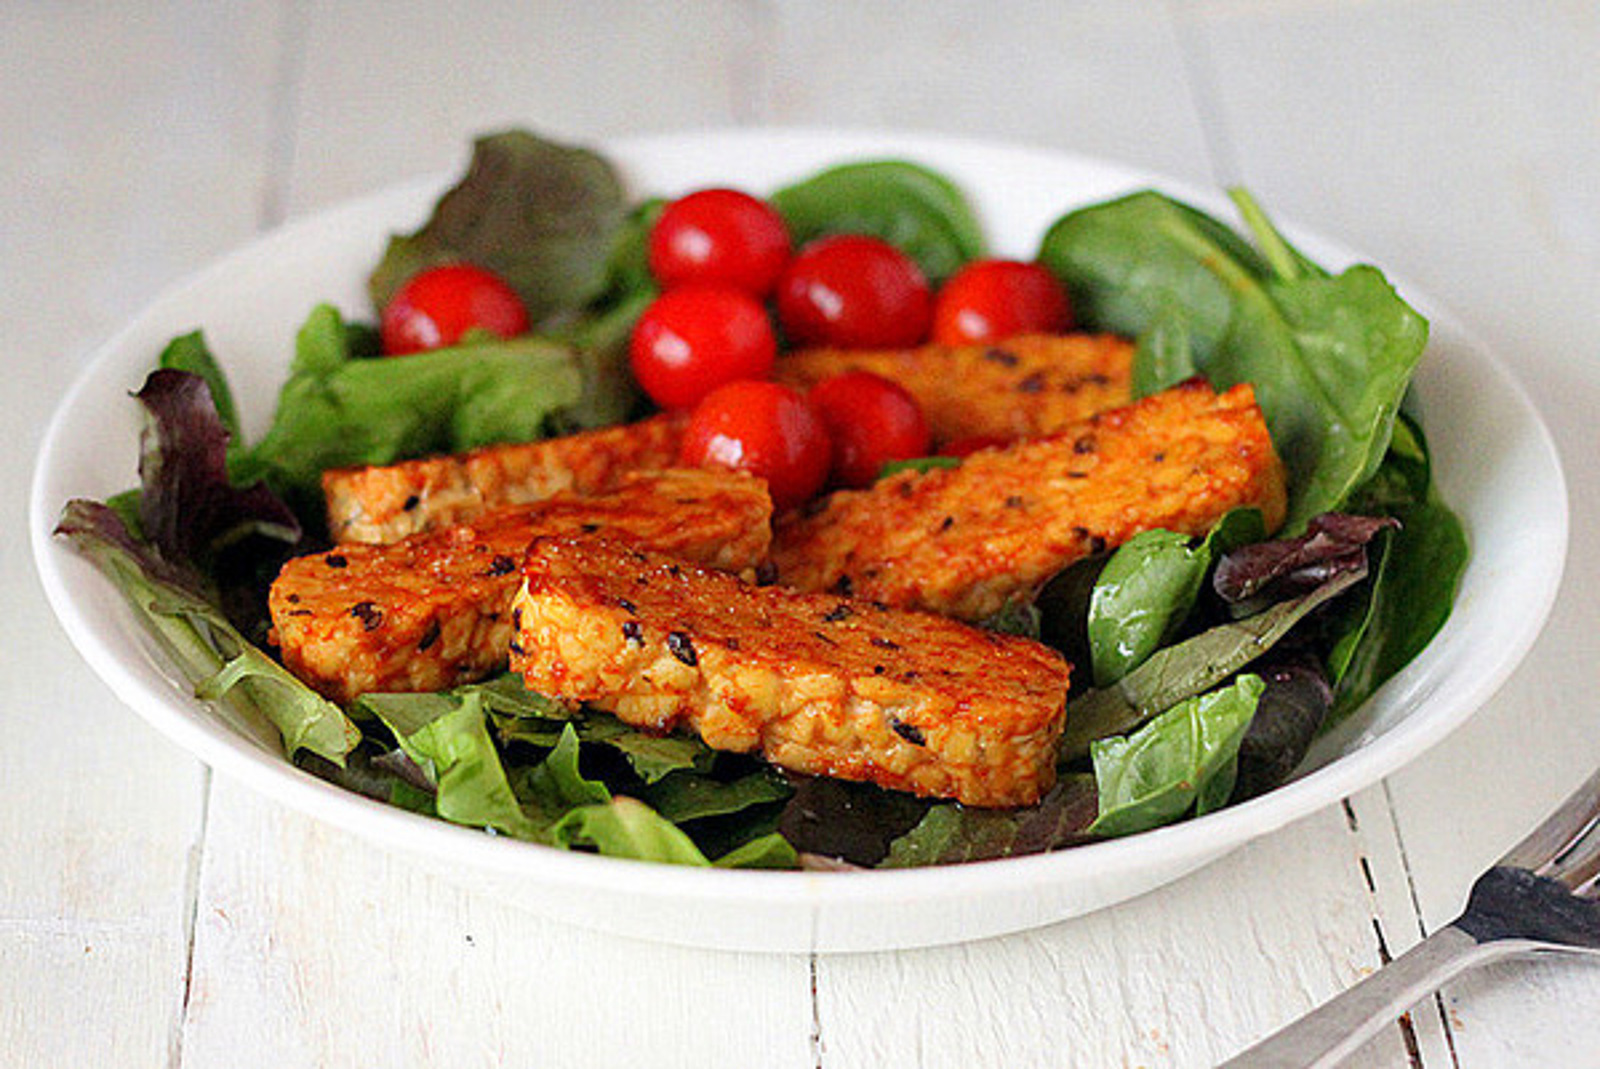 5 Tips for Making Amazing Tempeh Dishes